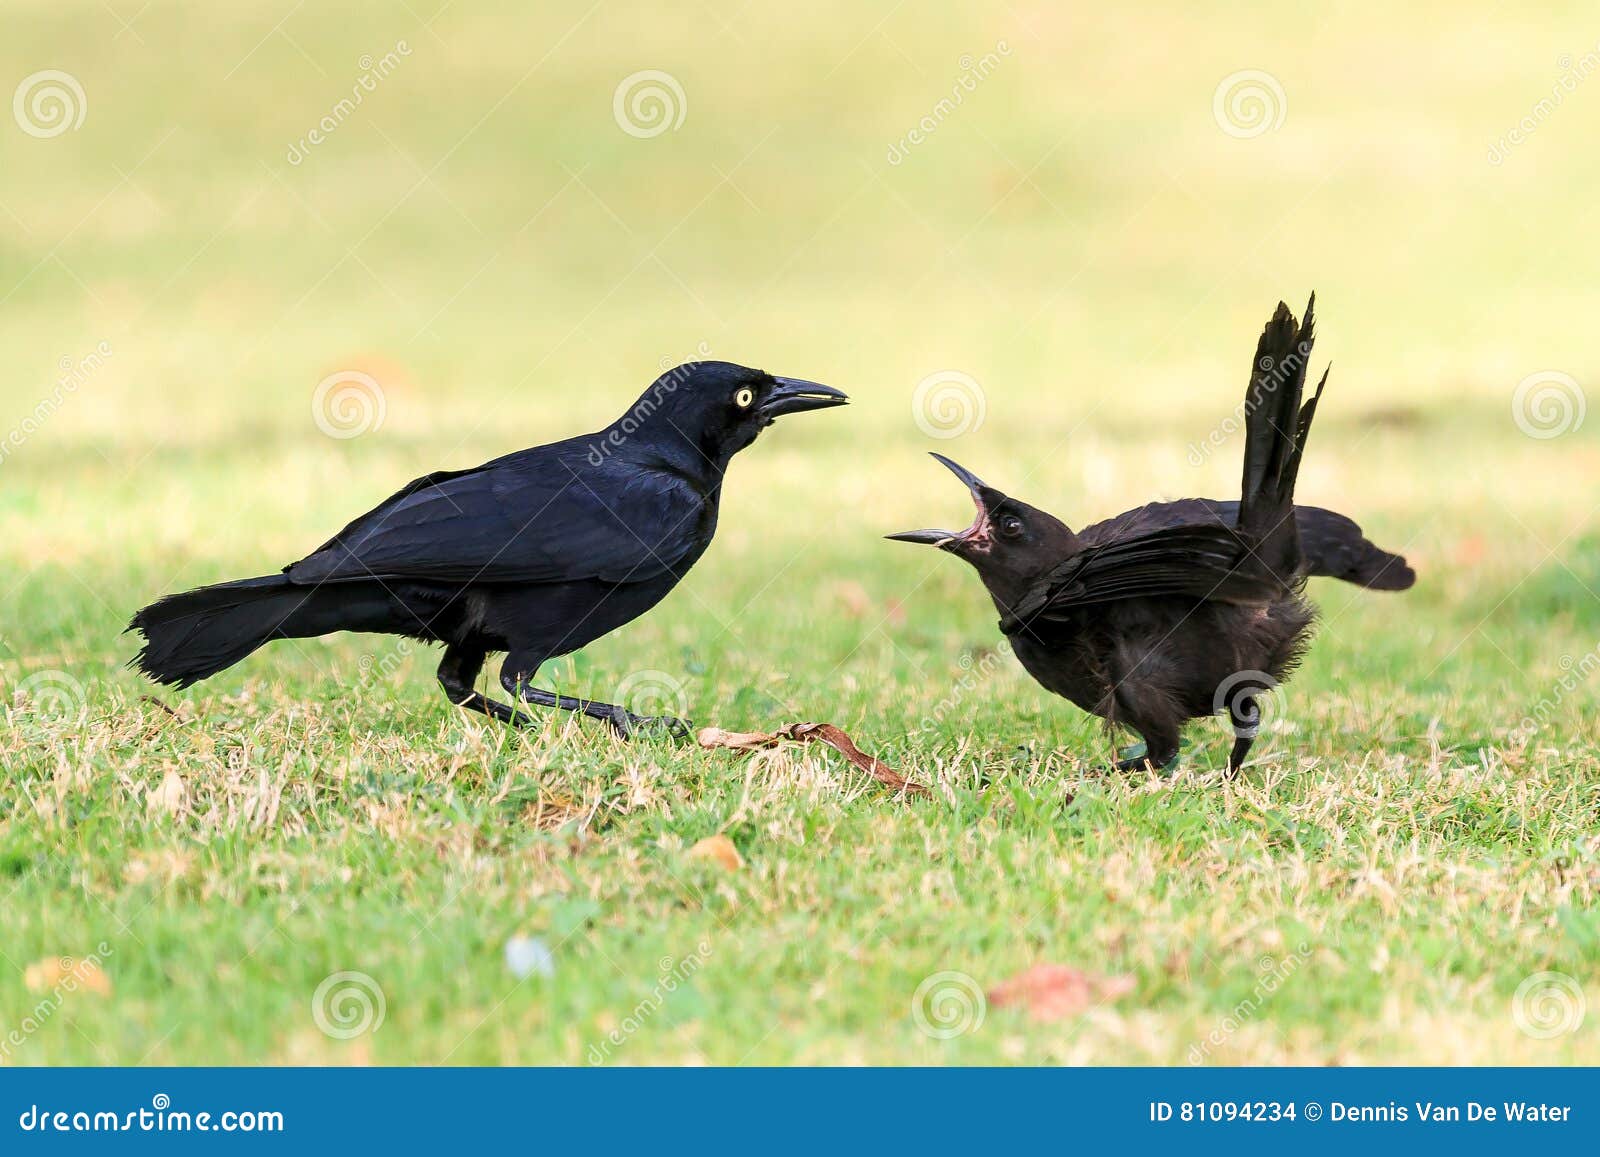 the greater antillean grackle